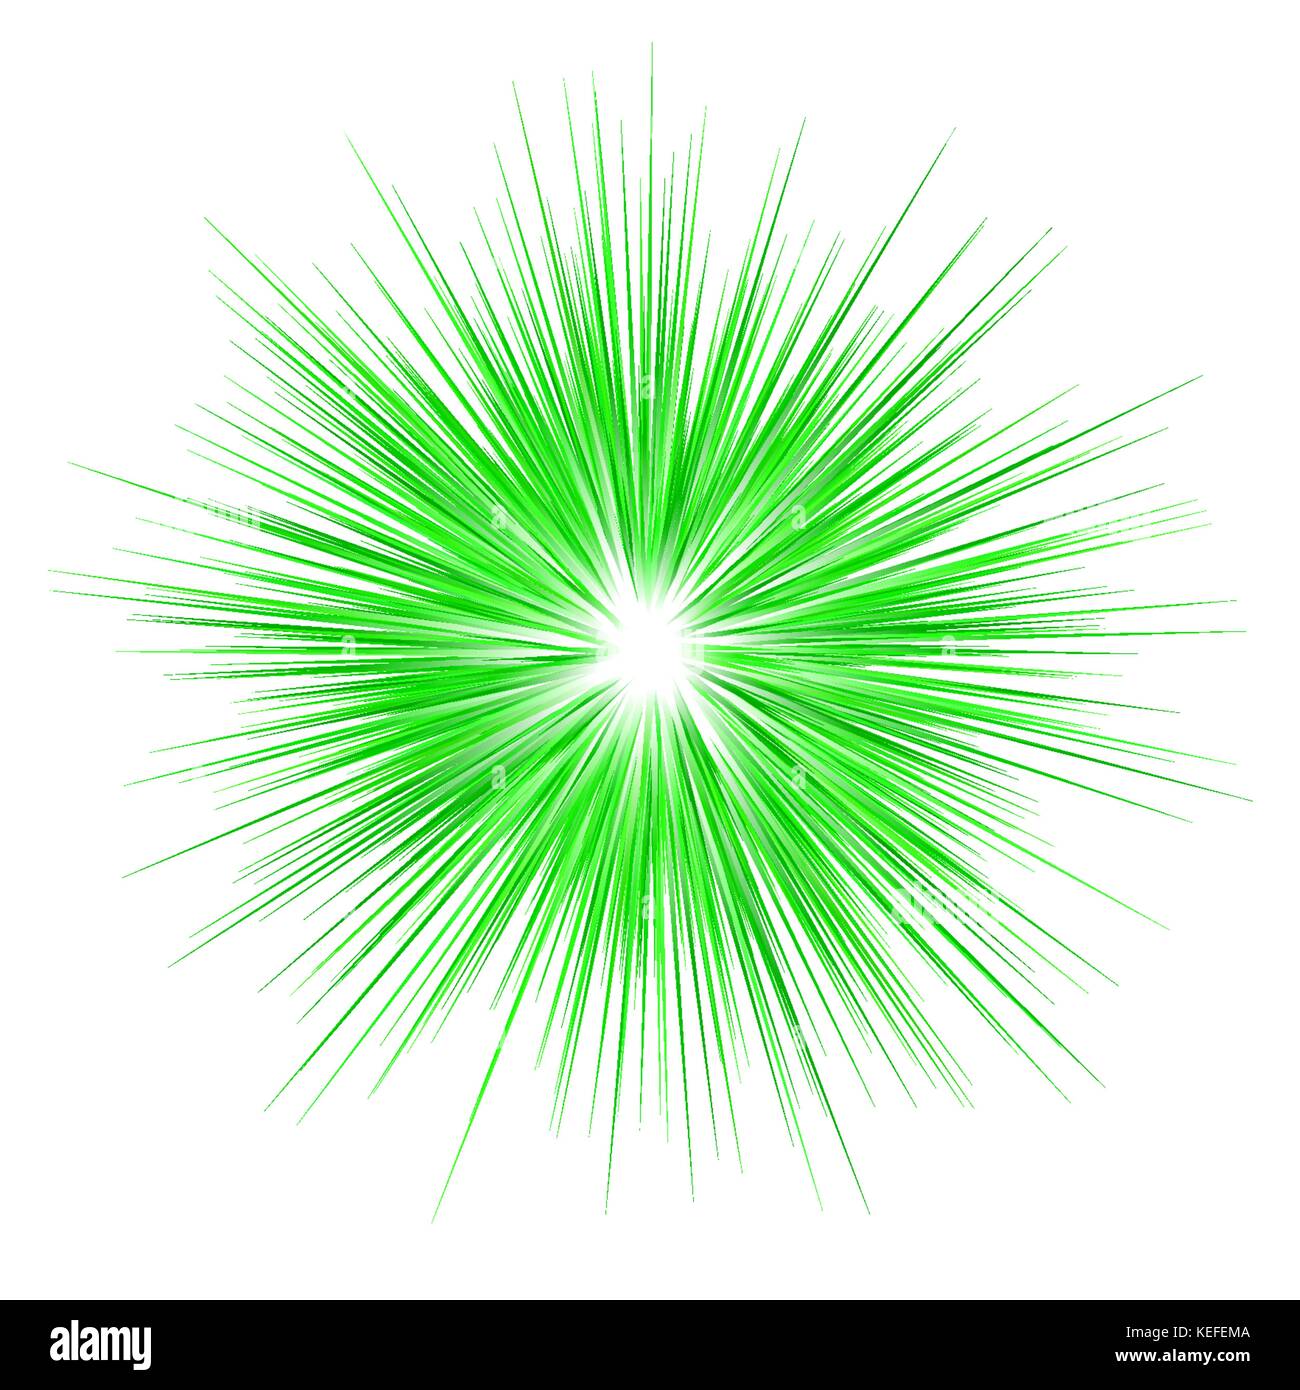 Green abstract explosion design background Stock Vector